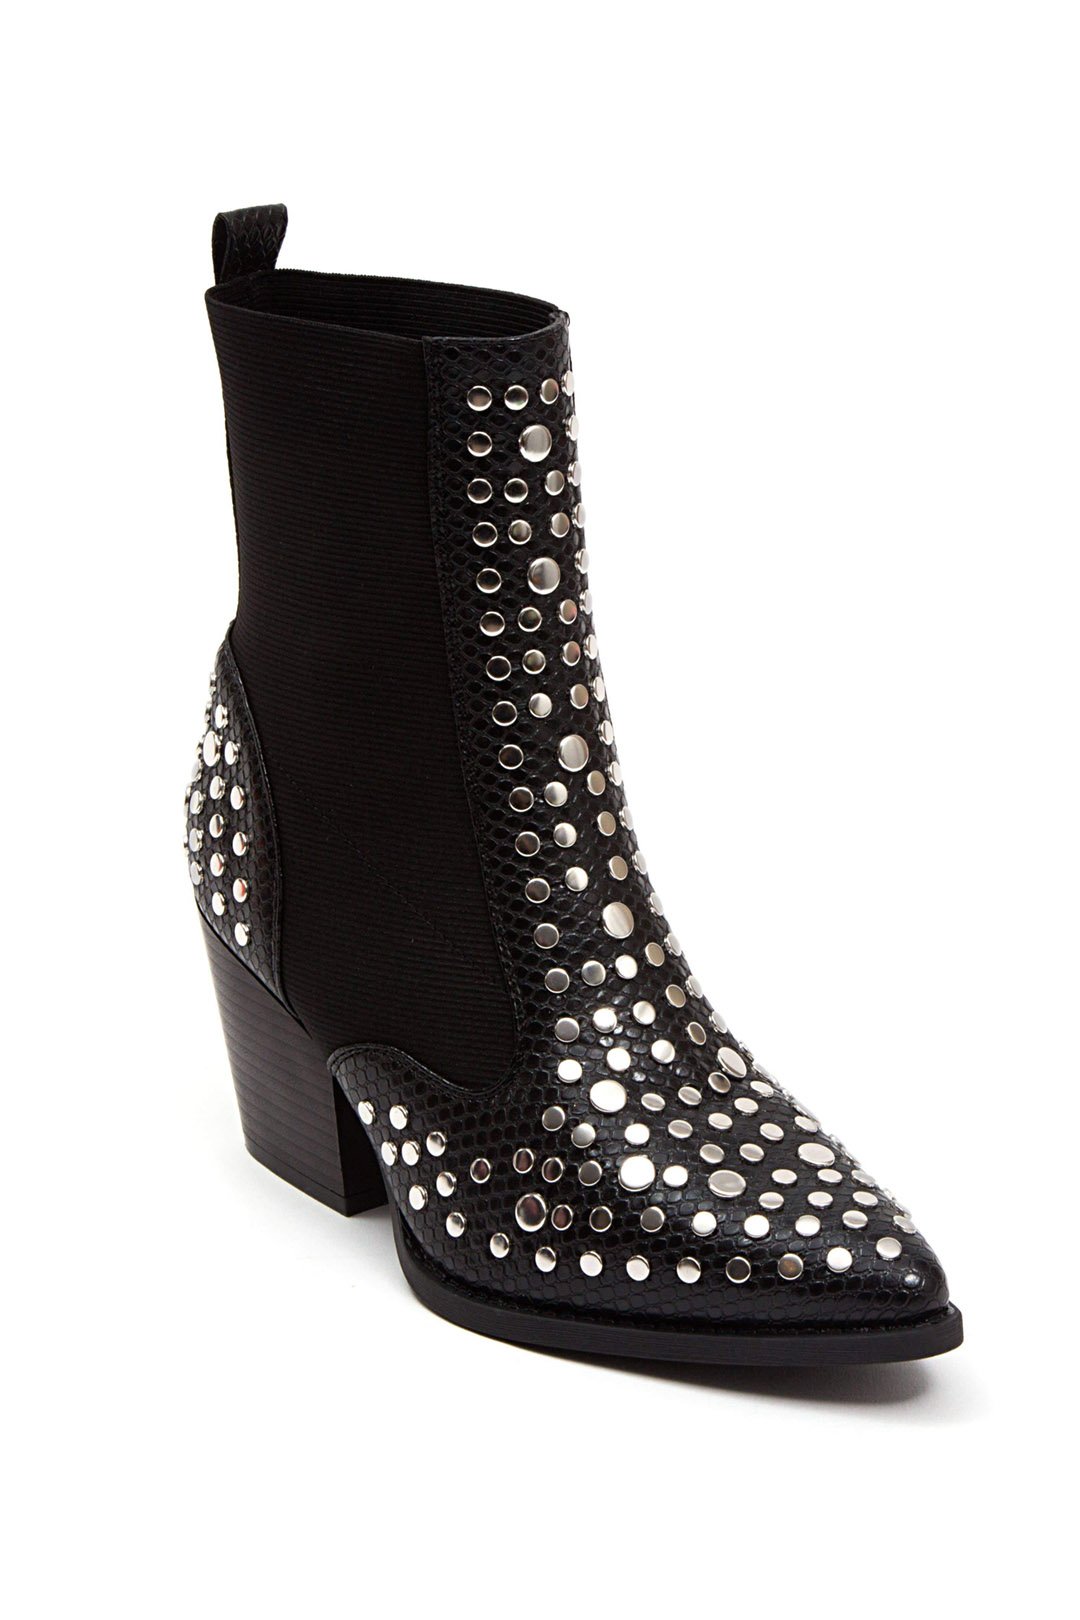 STACEY STUD BOOTIE BOOT LADY COUTURE BLACK 6 